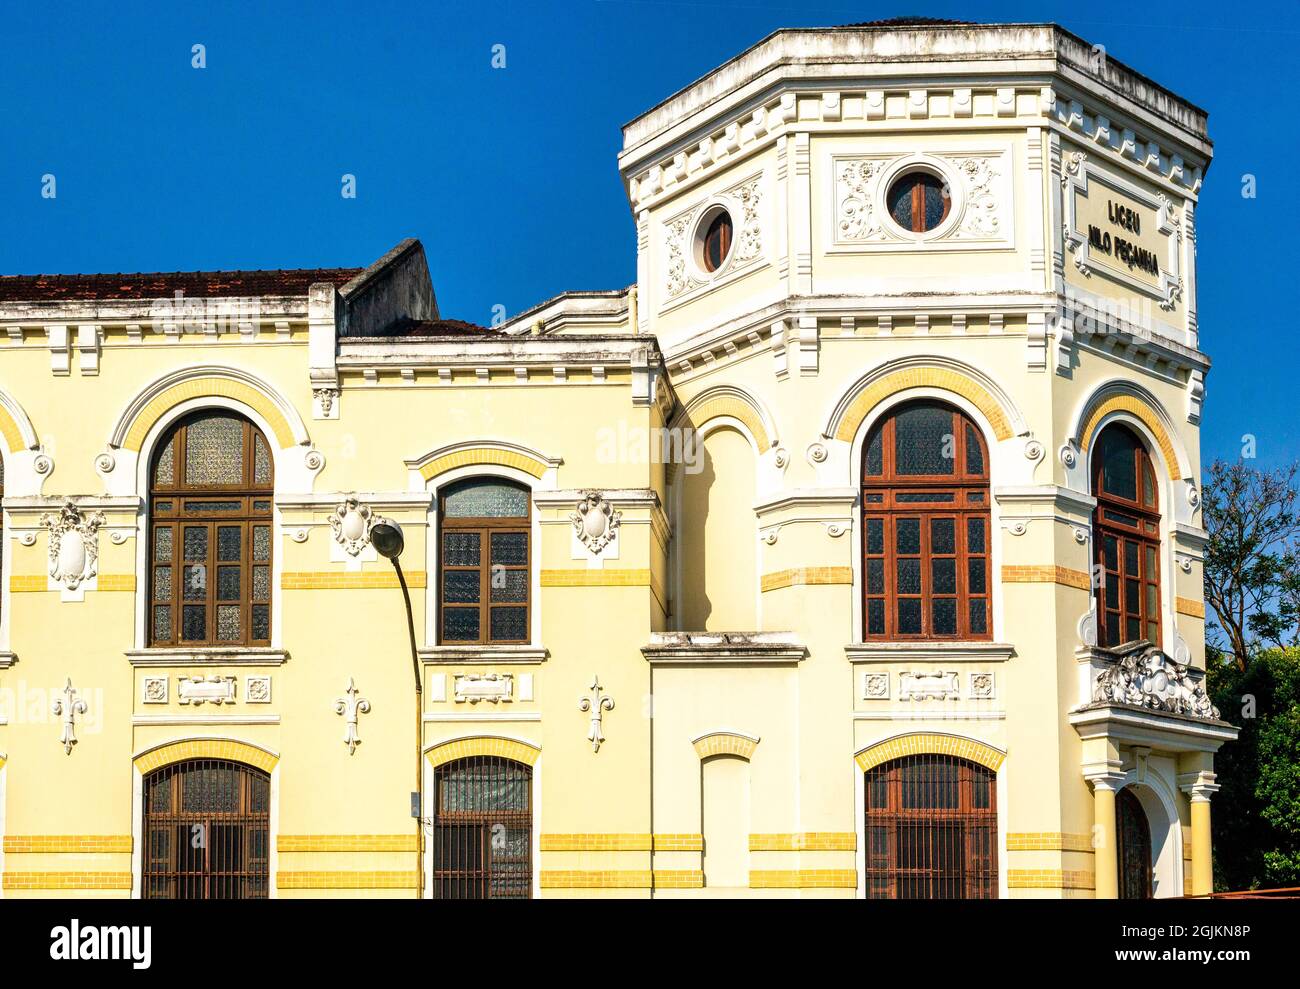 The exterior architecture of the College 'Liceo Nilo Pecanha' in Niteroi, Rio de Janeiro, Brazil. The old building is a famous place in the city Stock Photo